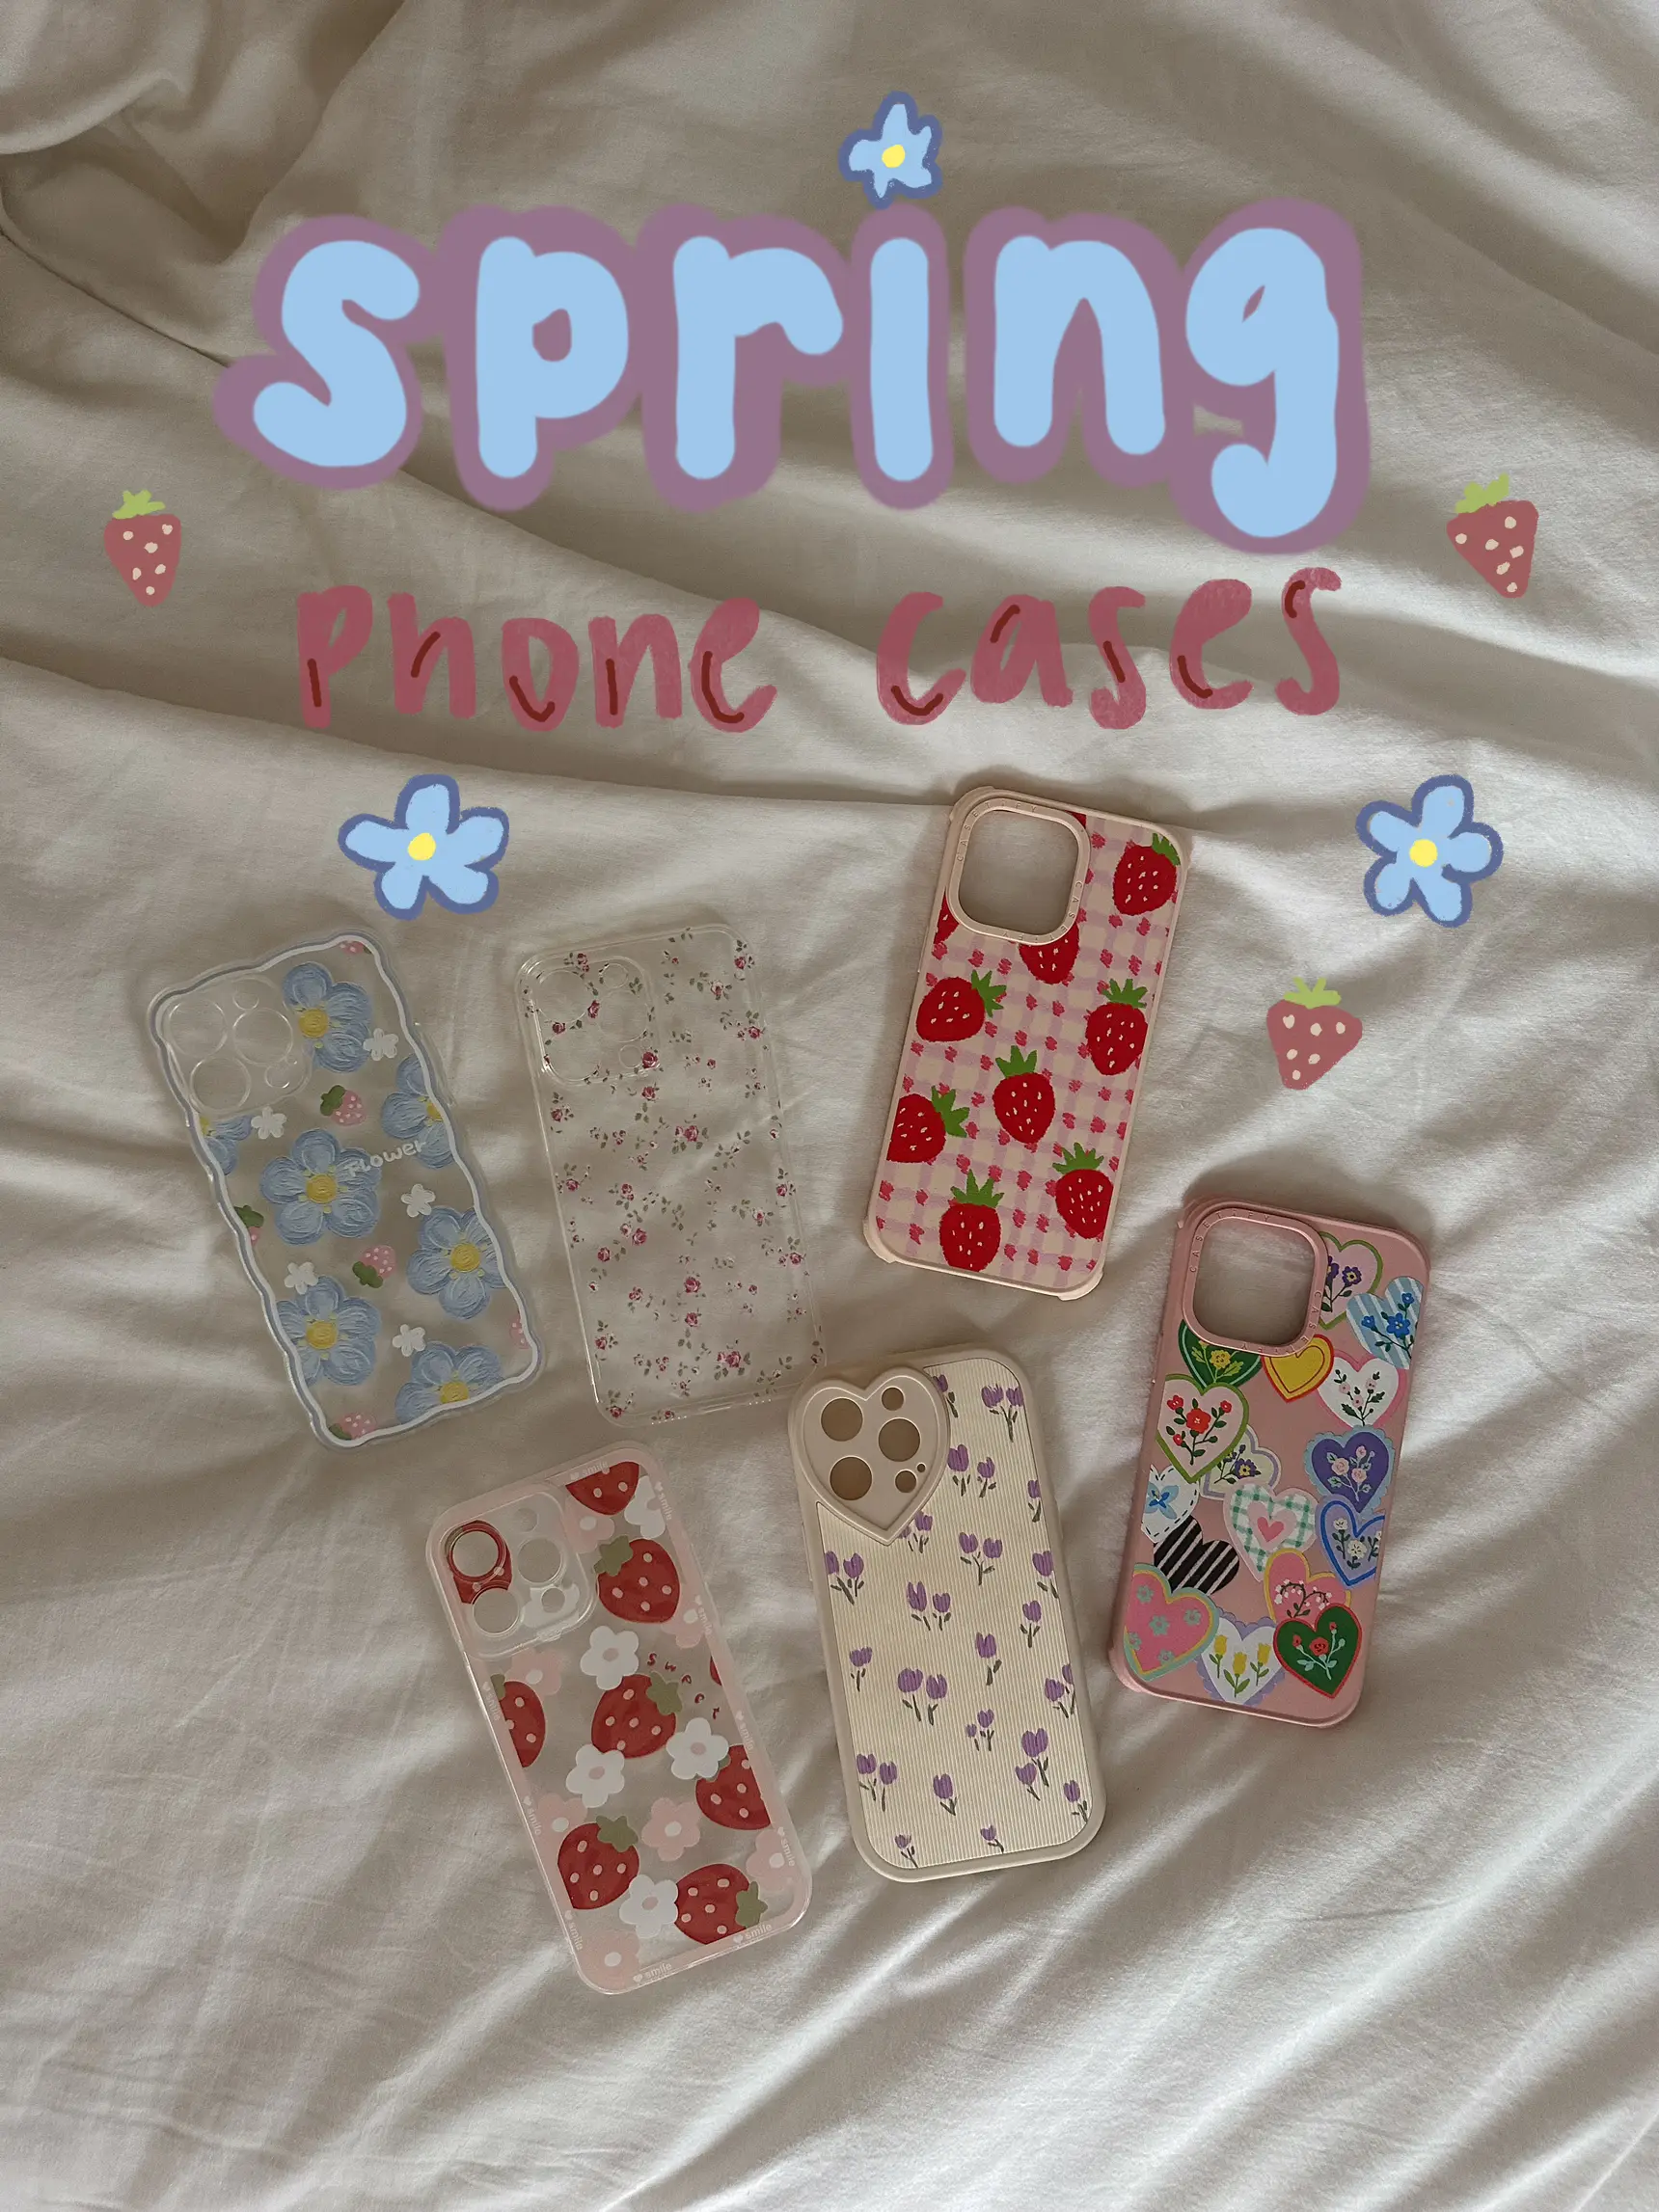 spring phone cases🍓🌸's images